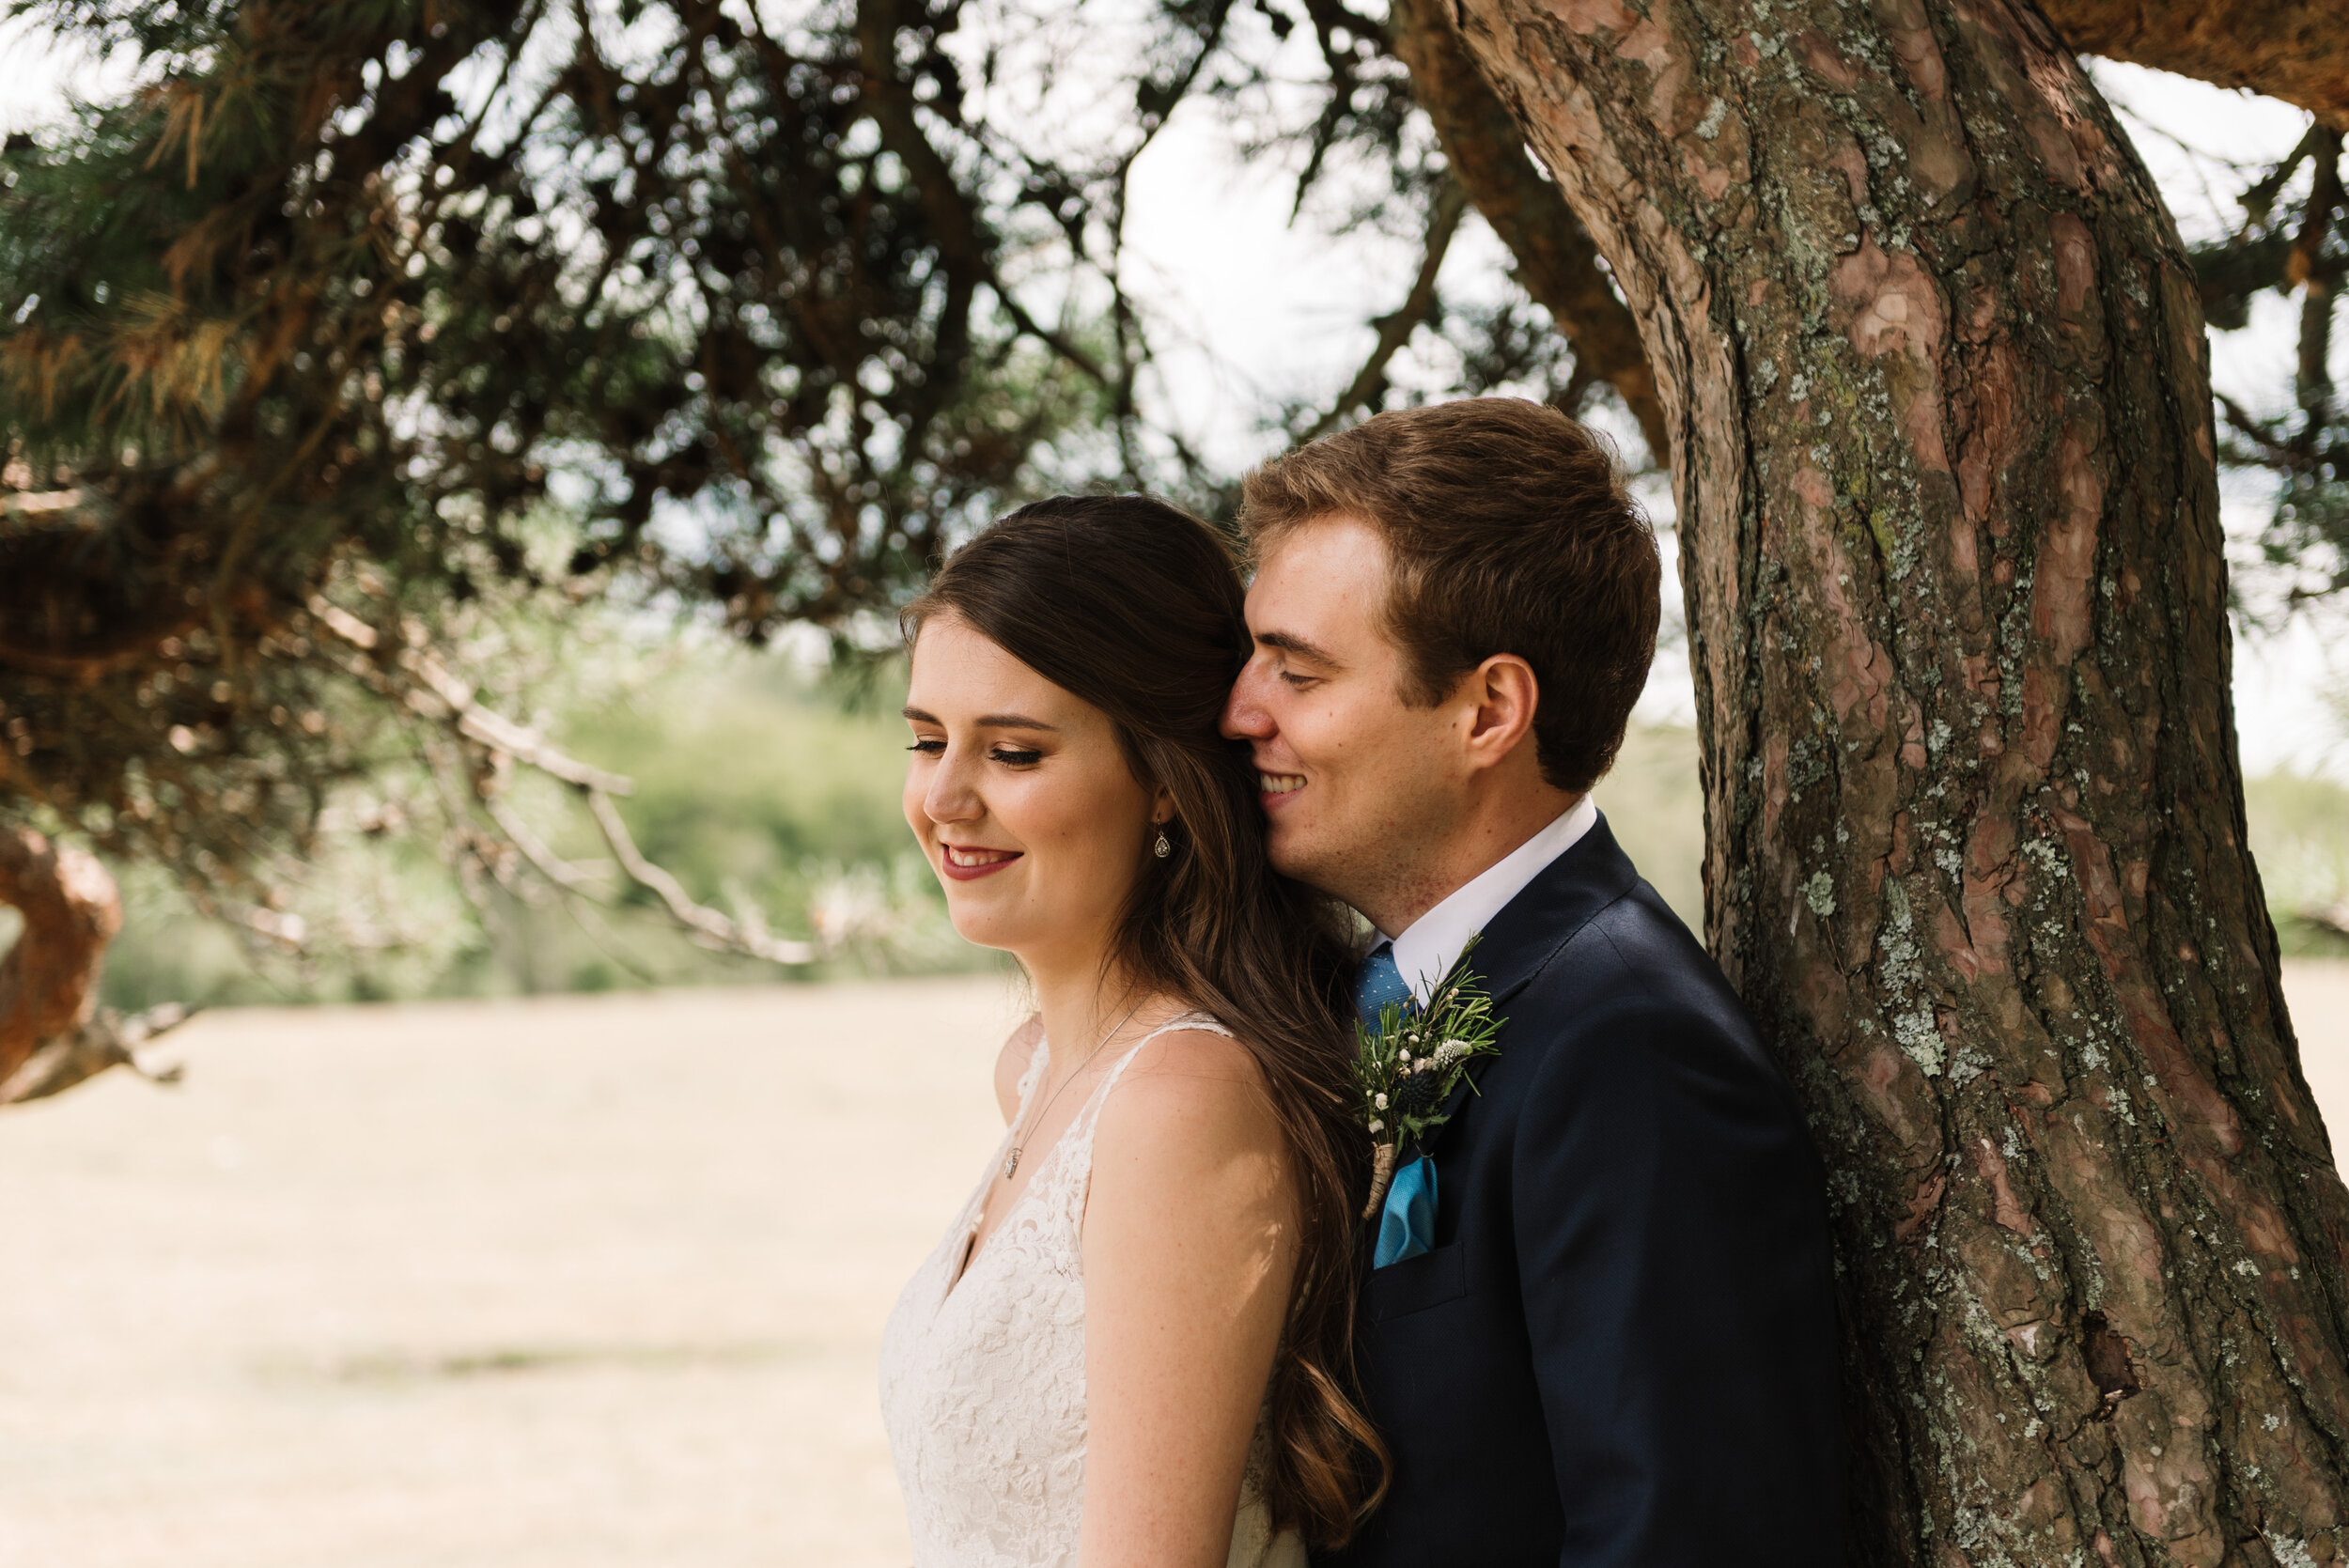 Close-up of bride and groom's faces by tree in the New Forest